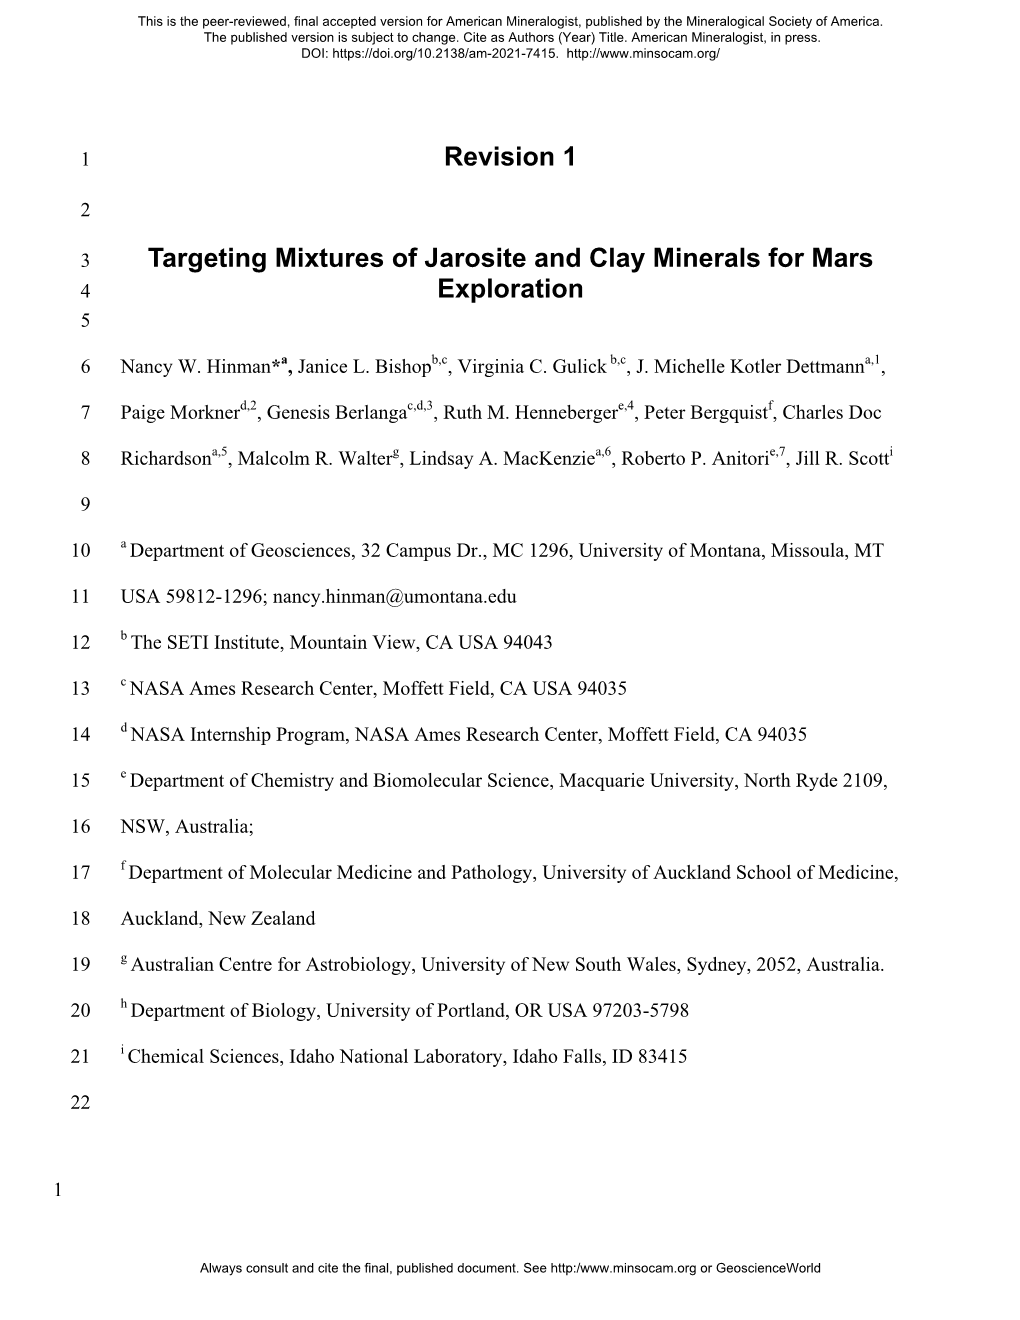 Targeting Mixtures of Jarosite and Clay Minerals for Mars Exploration